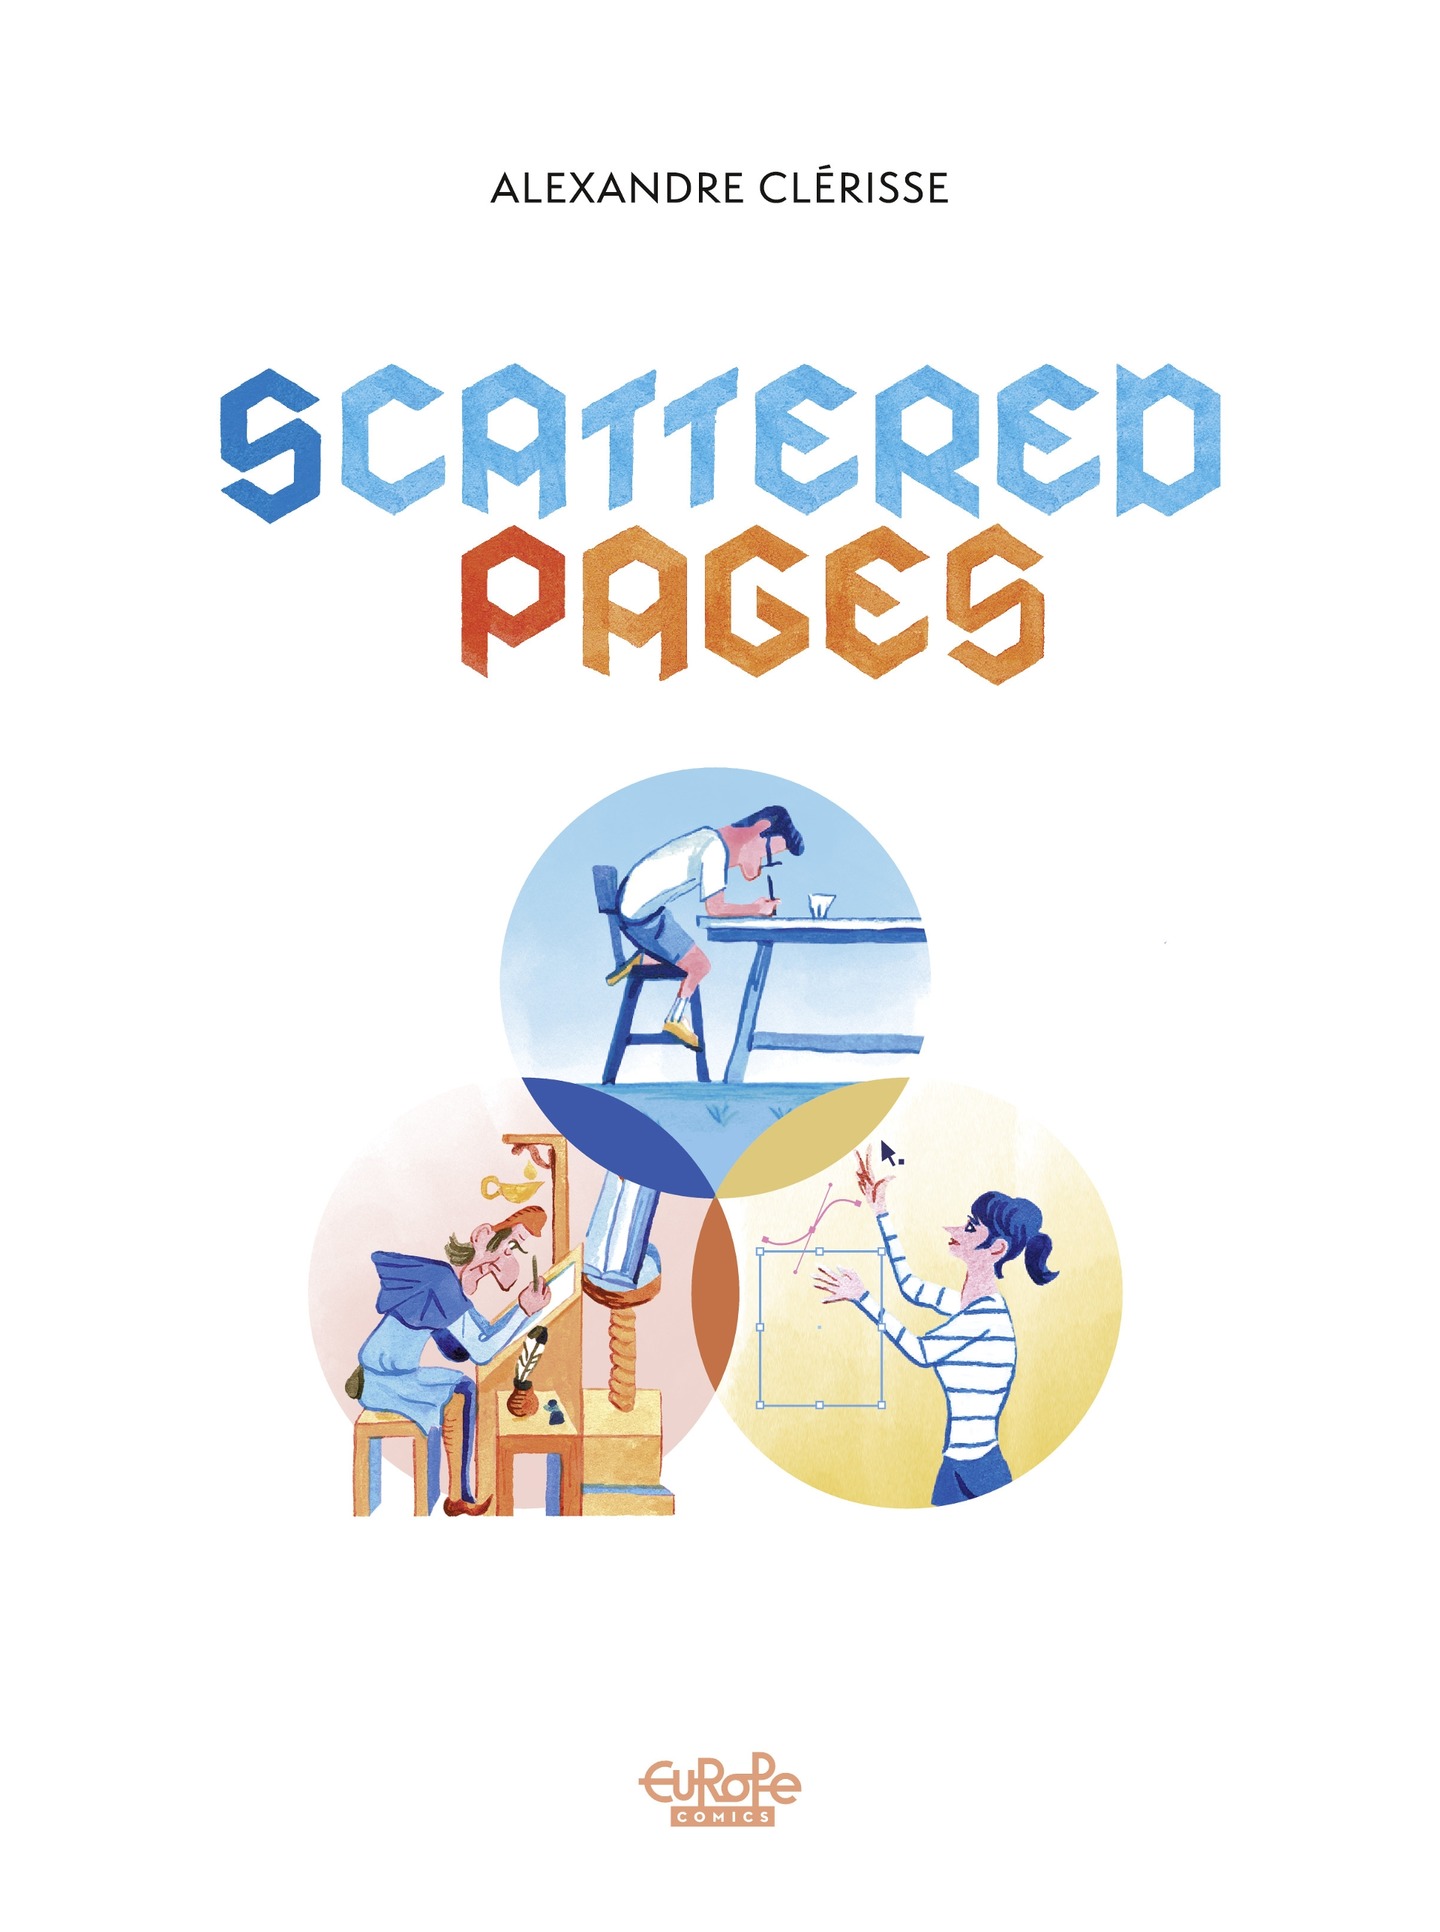 Read online Scattered Pages comic -  Issue # TPB - 2